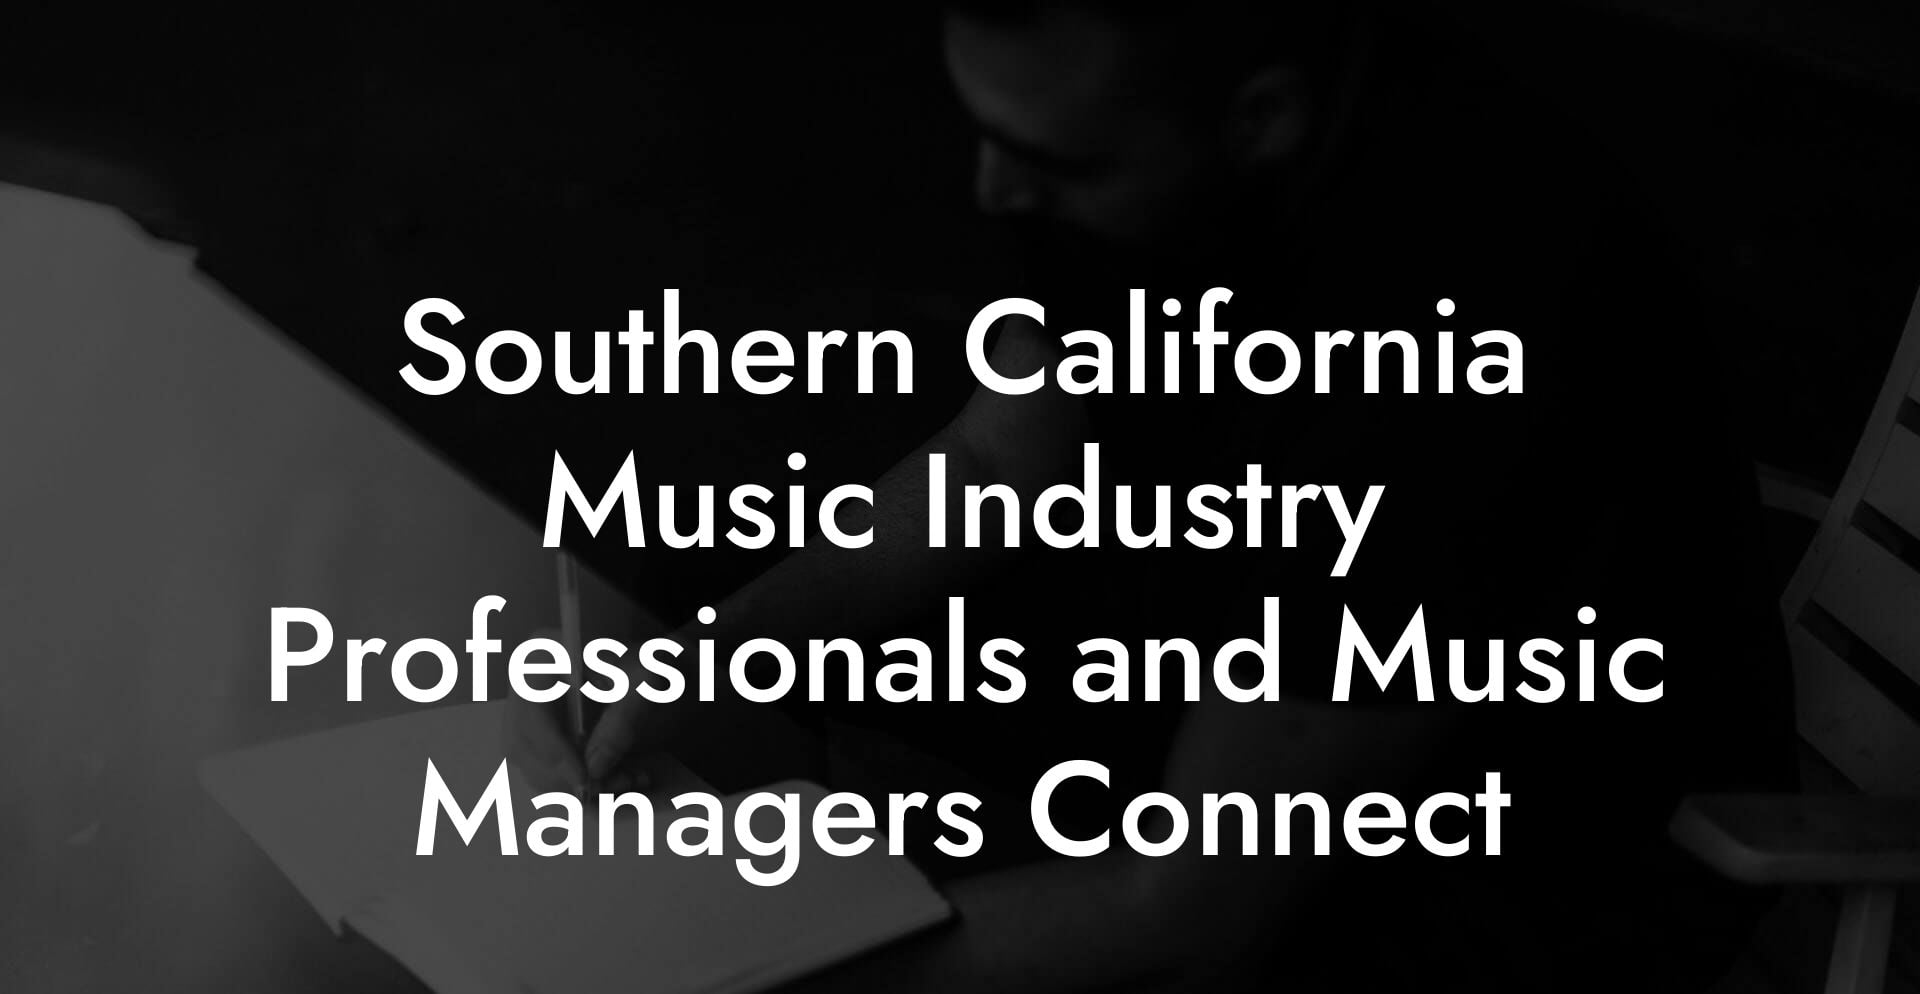 Southern California Music Industry Professionals and Music Managers Connect